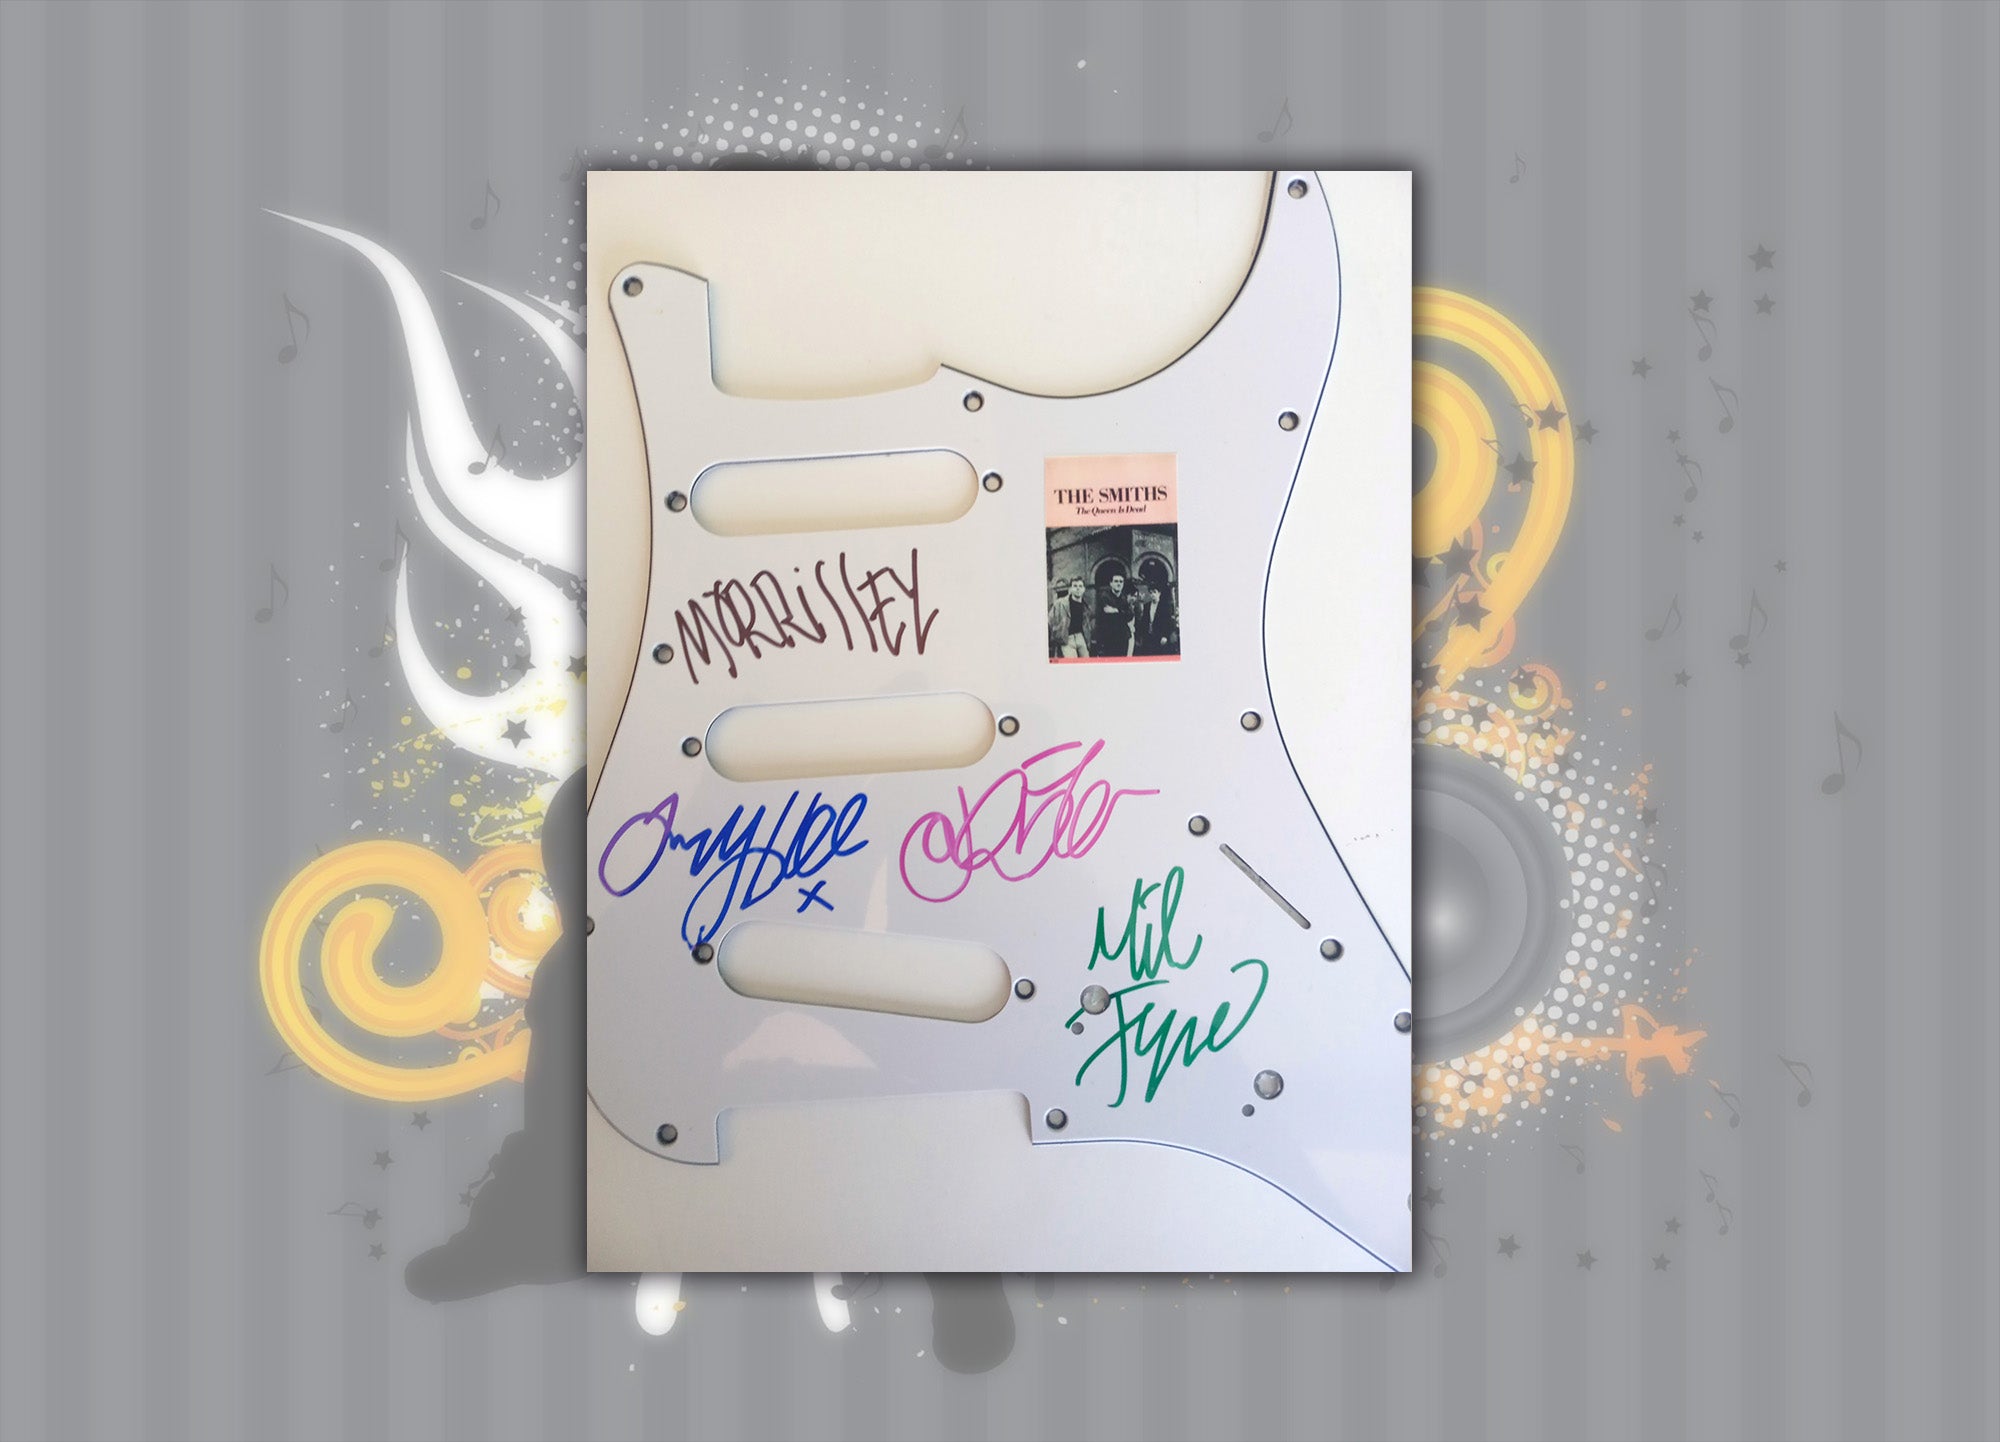 Morrissey and the Smiths guitar pickguard signed with proof